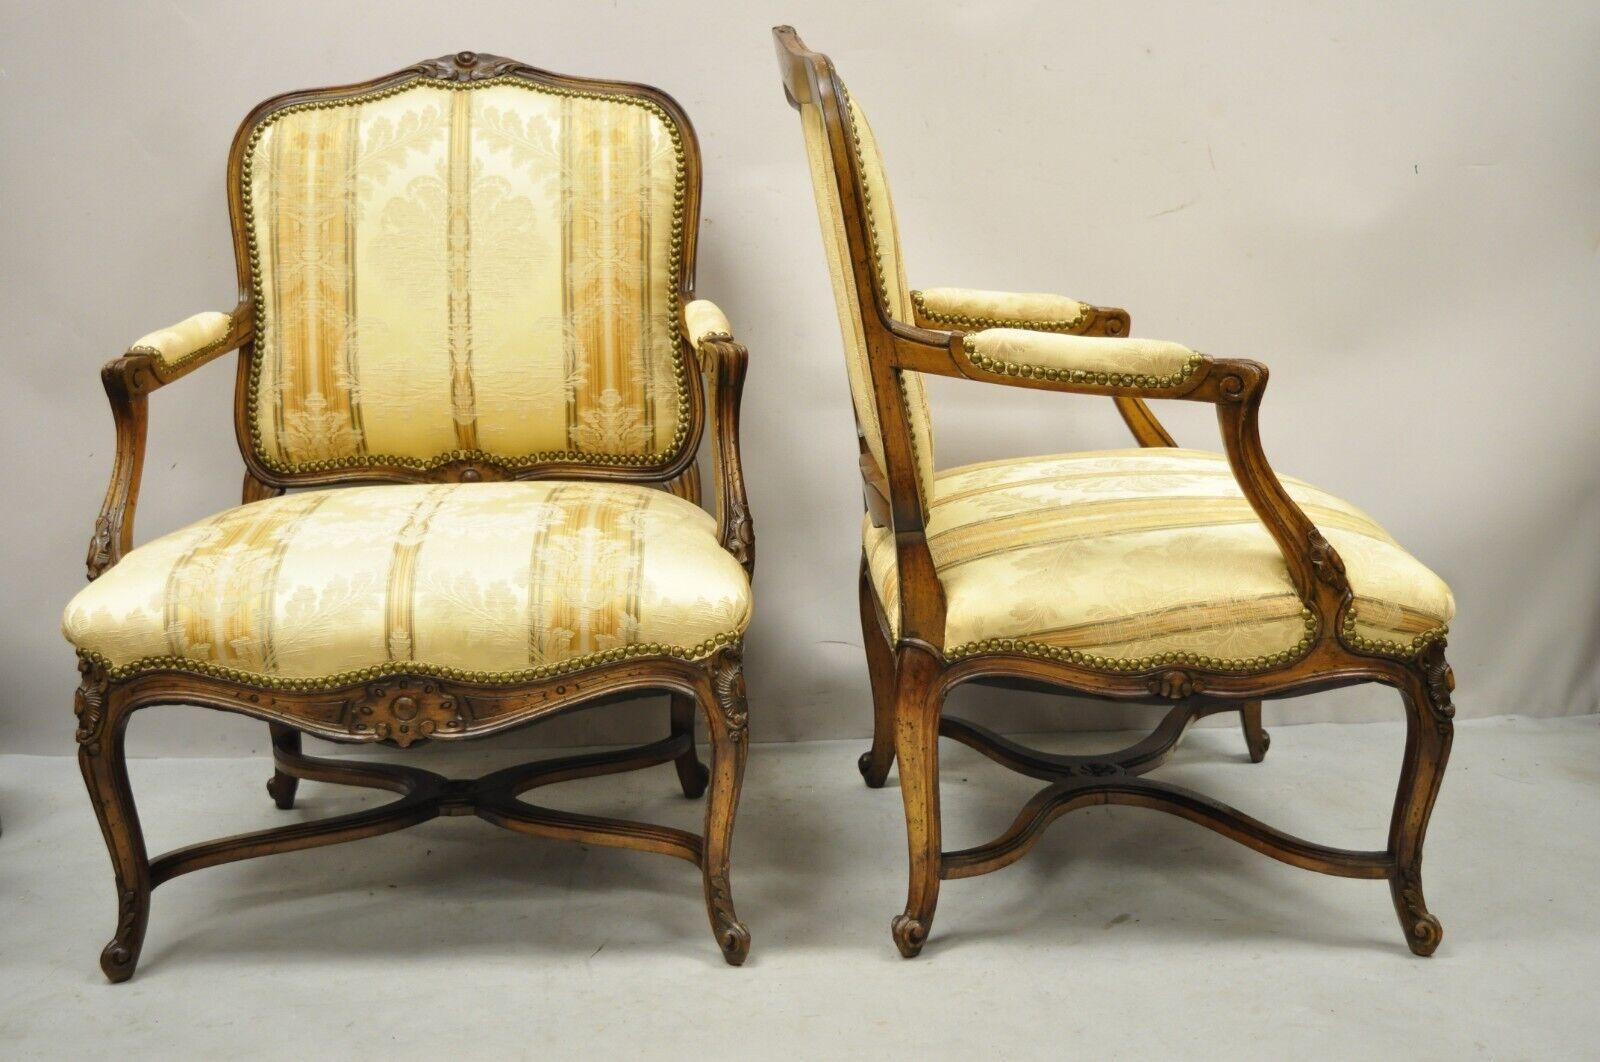 Vintage French Provincial Louis XV Country Style Lounge Chairs - a Pair For Sale 7